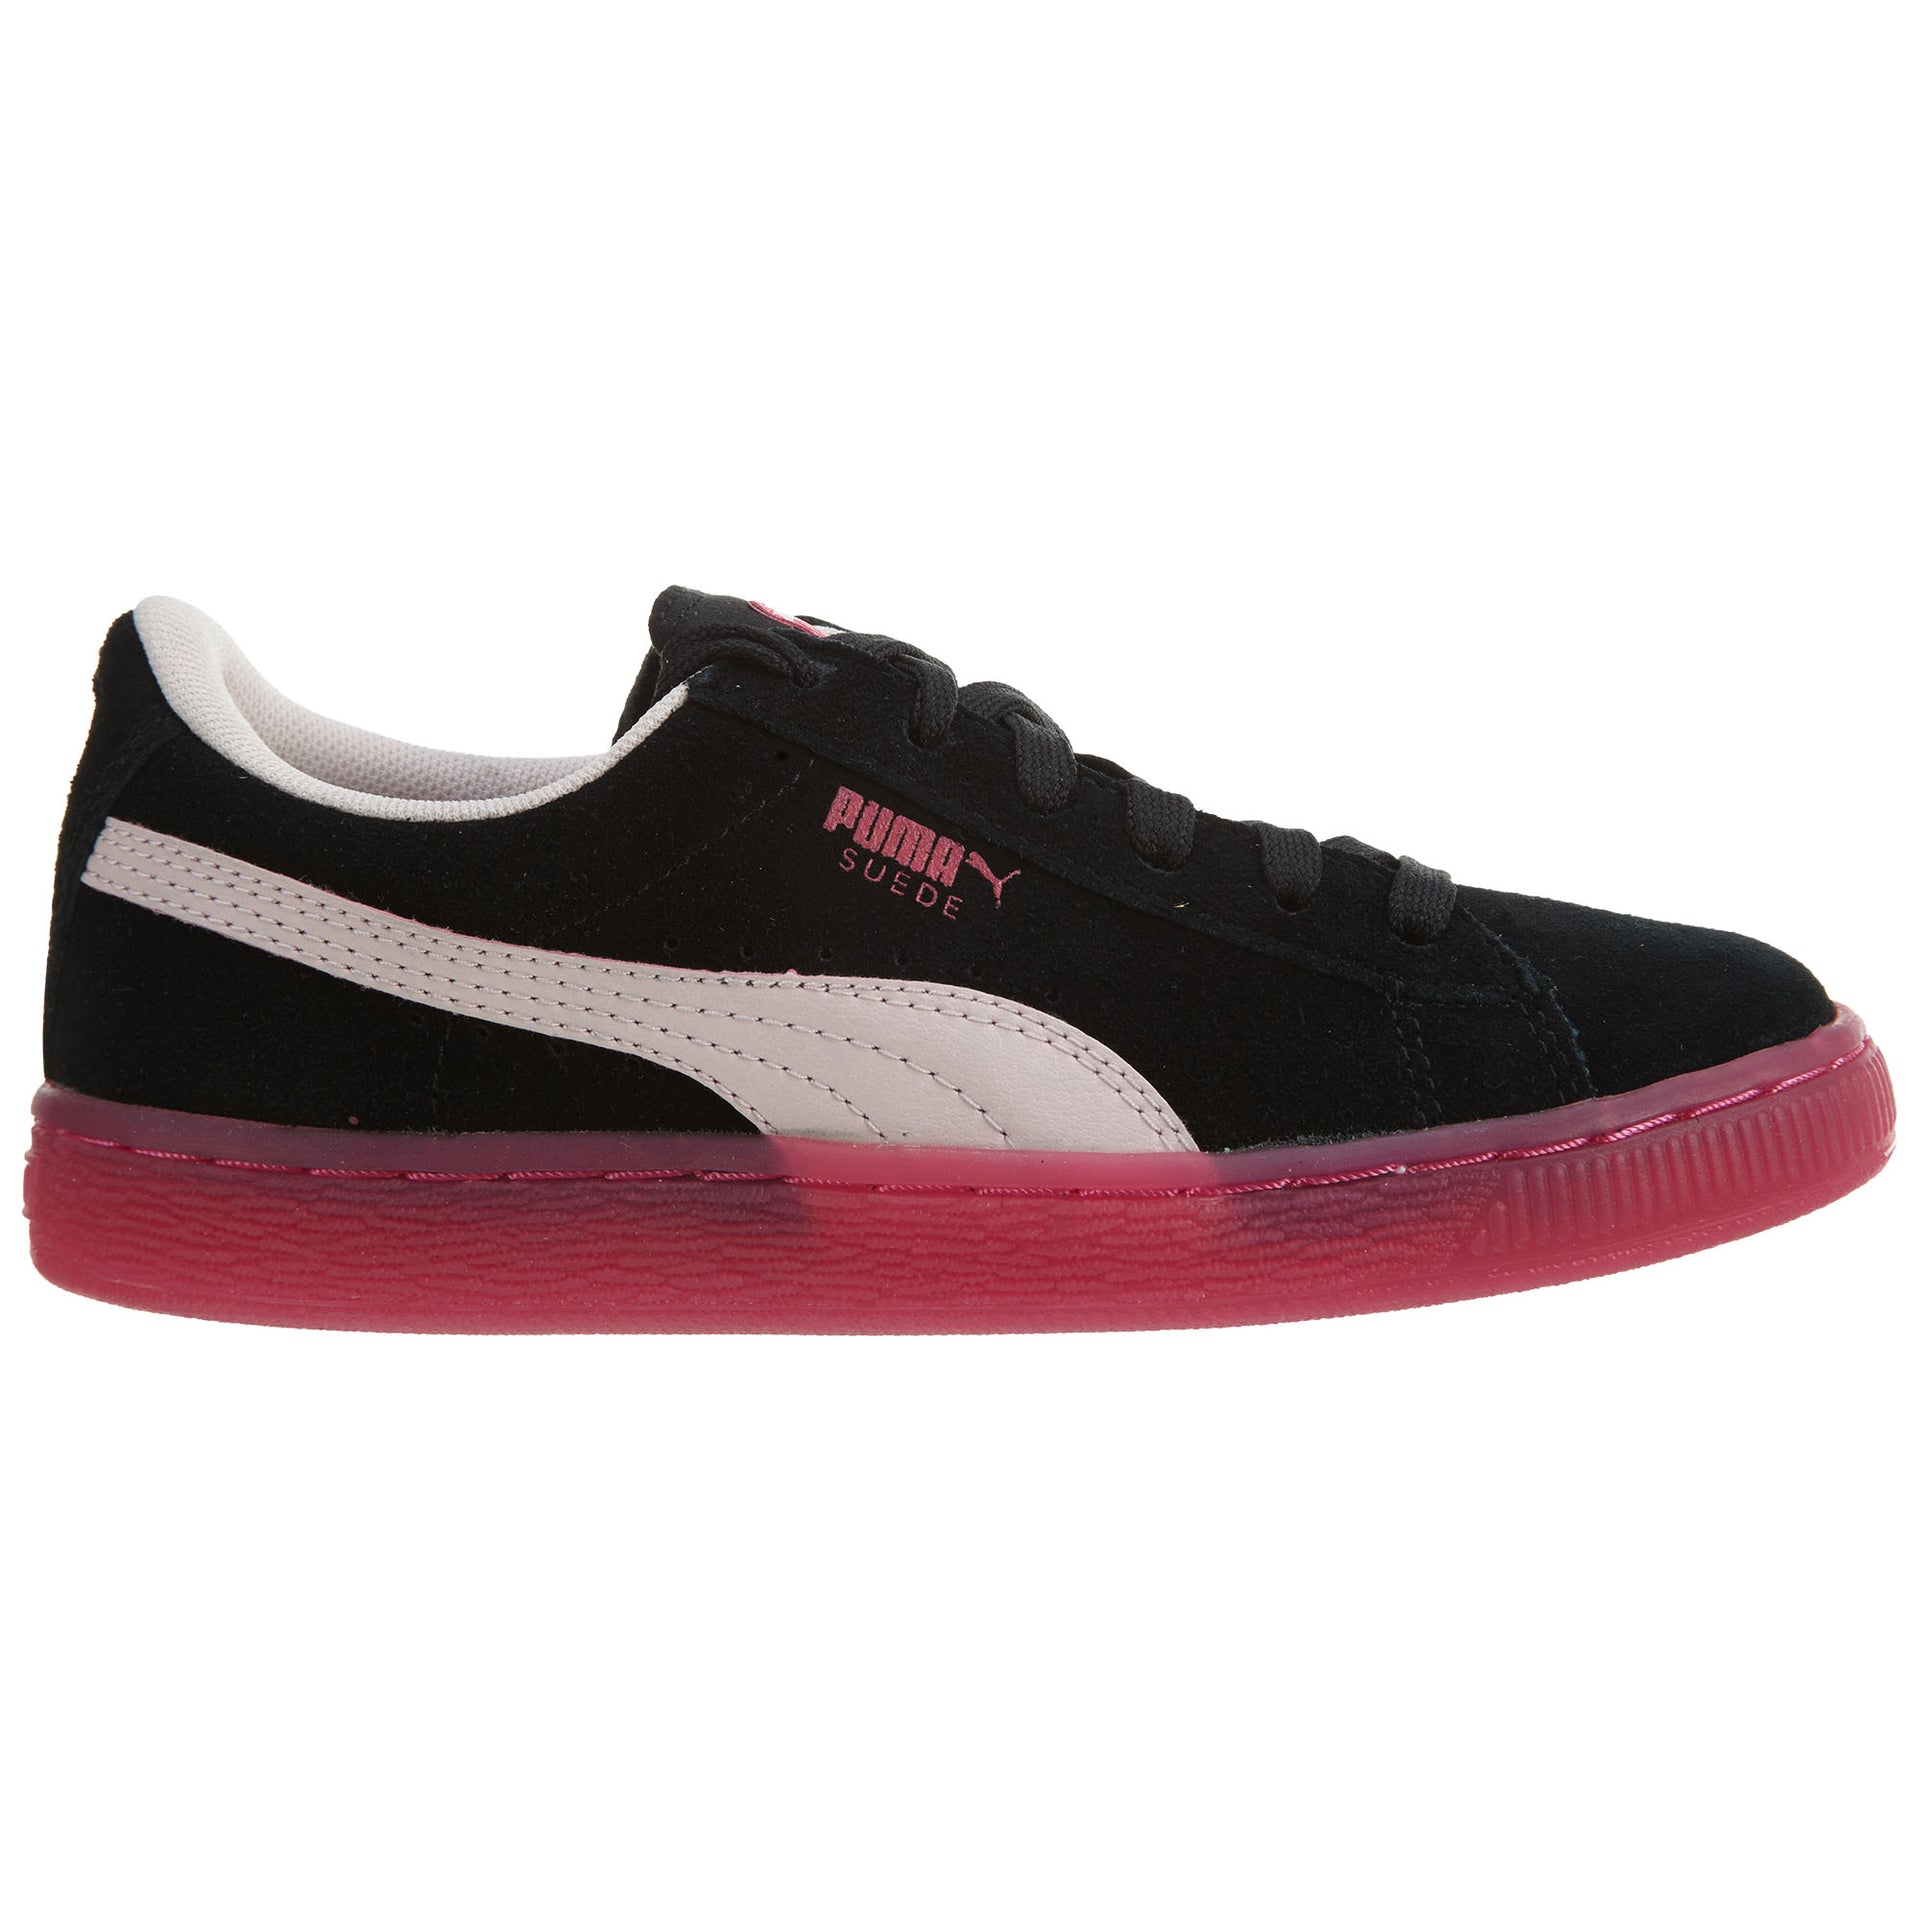 Puma Suede Lfs Iced Ps Little Kids Style : 363246